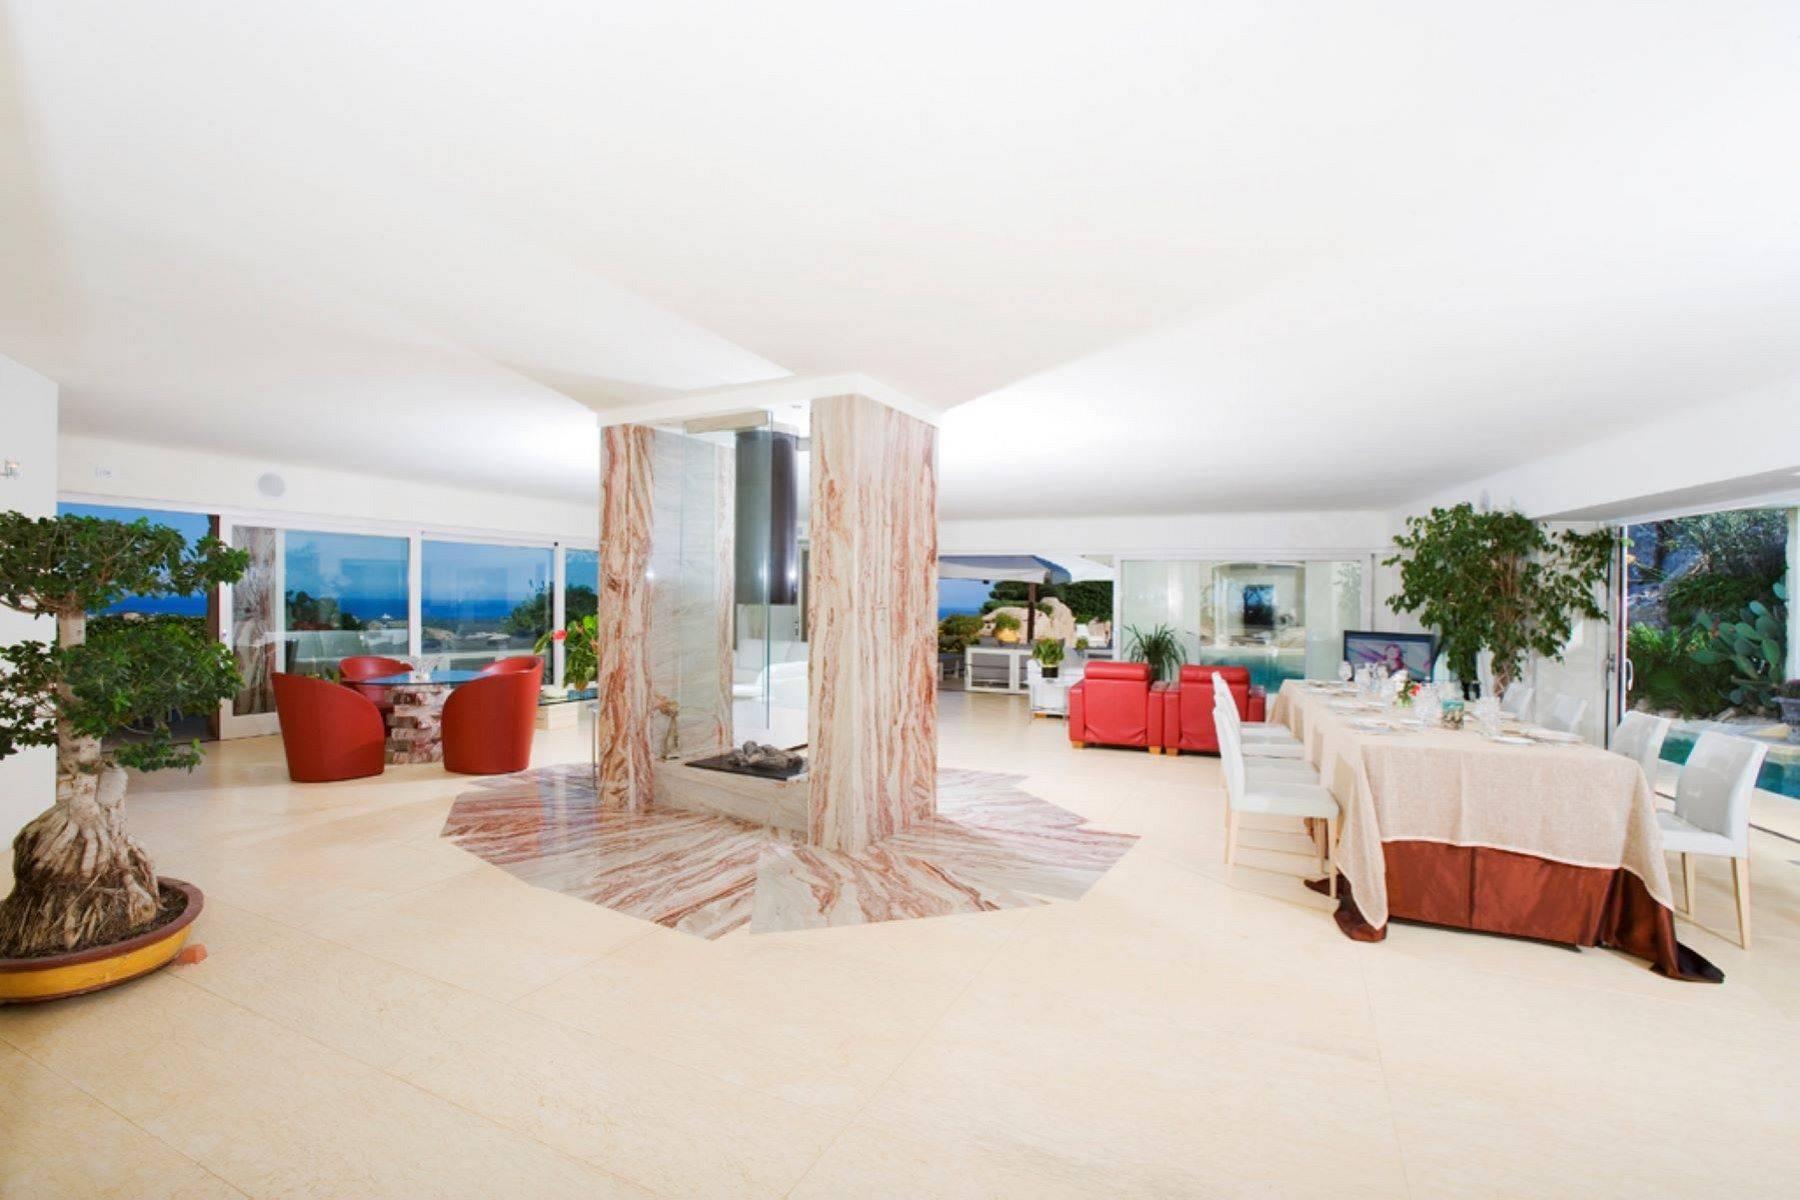 Exclusive property with stunning sea views overlooking the Costa Smeralda - 6